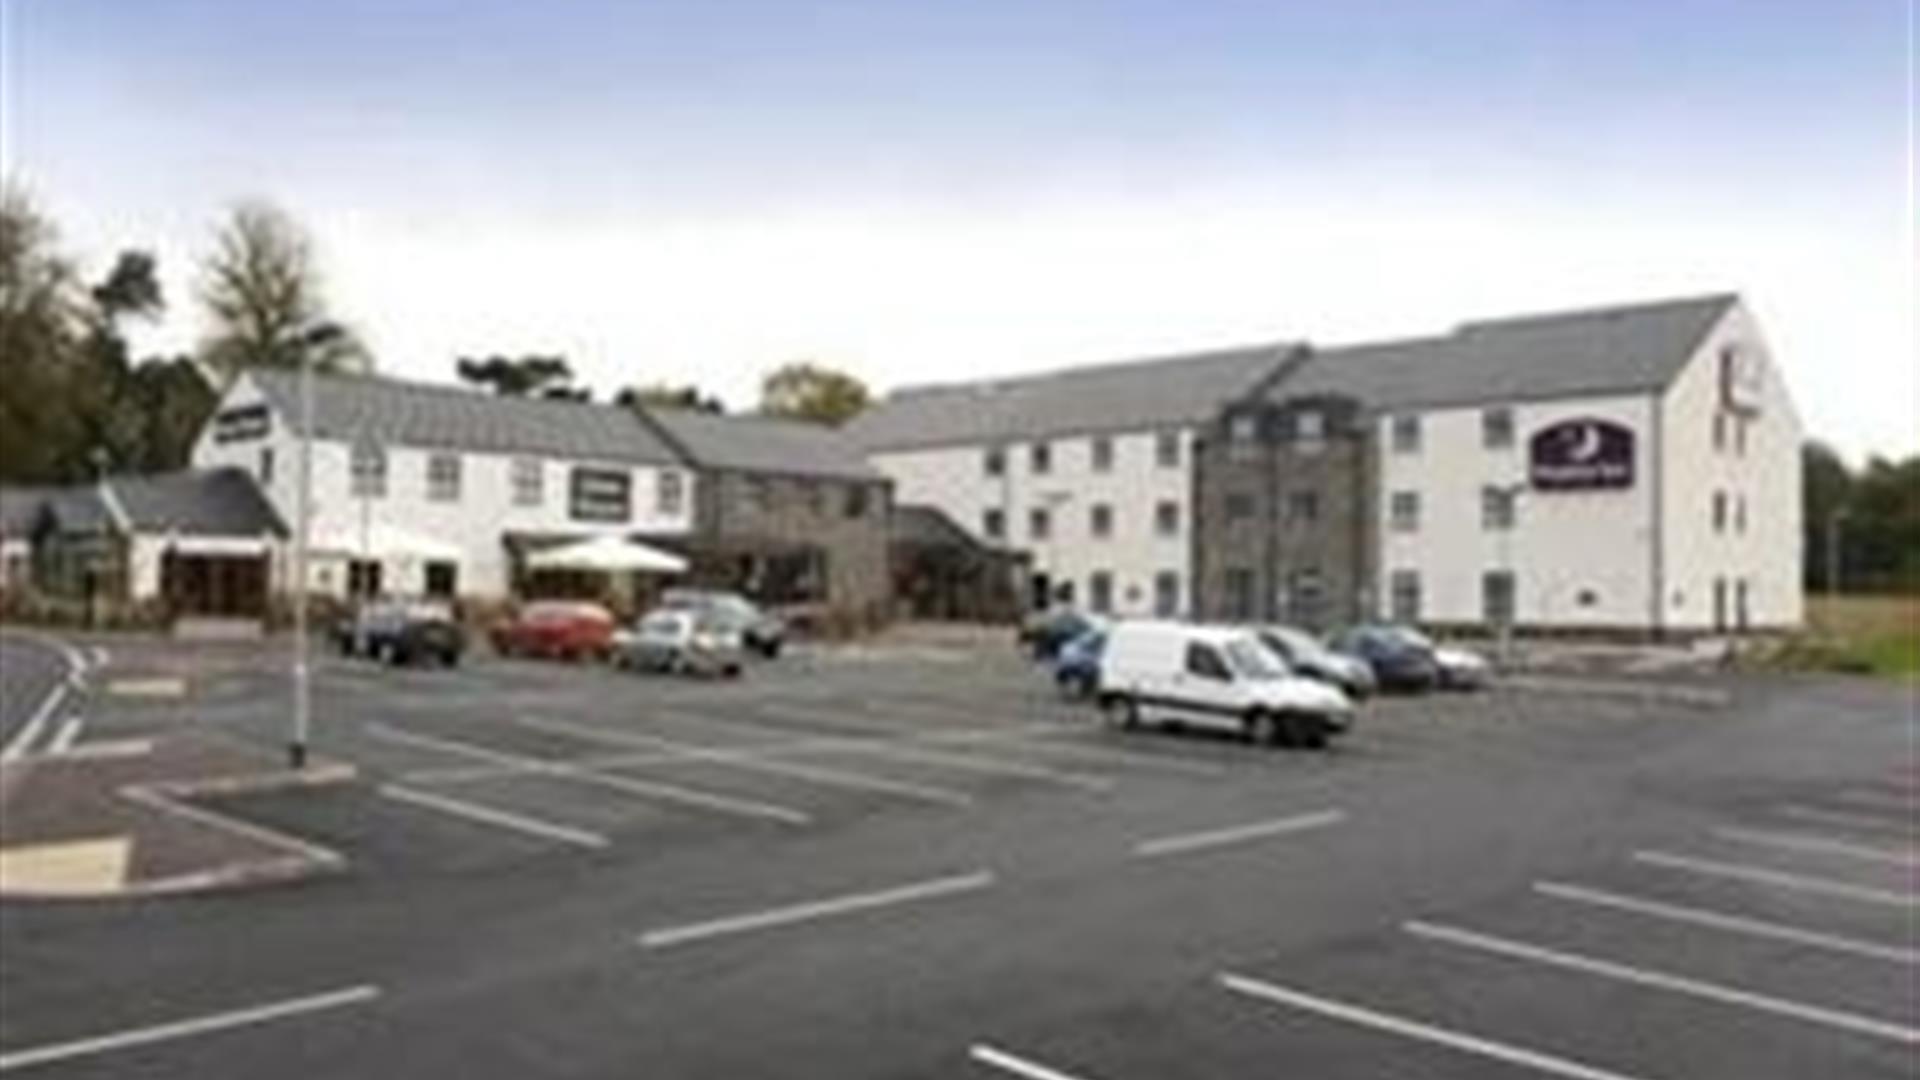 Image shows front of hotel and car parking spaces